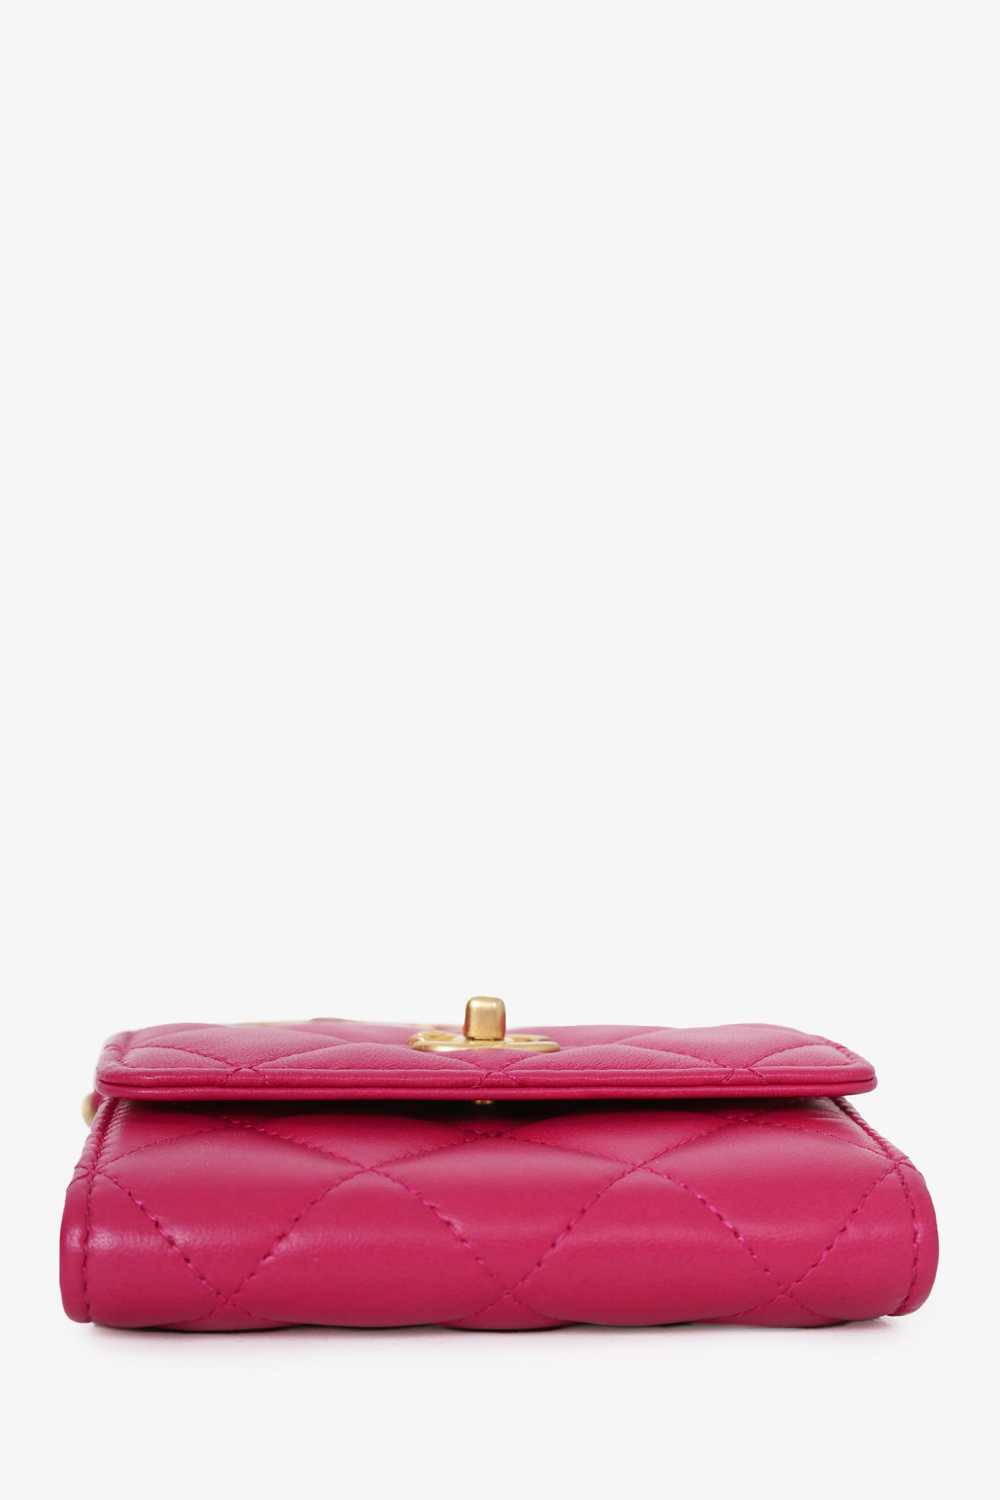 Pre-loved Chanel™ Pink Quilted Leather Pearl Crus… - image 9